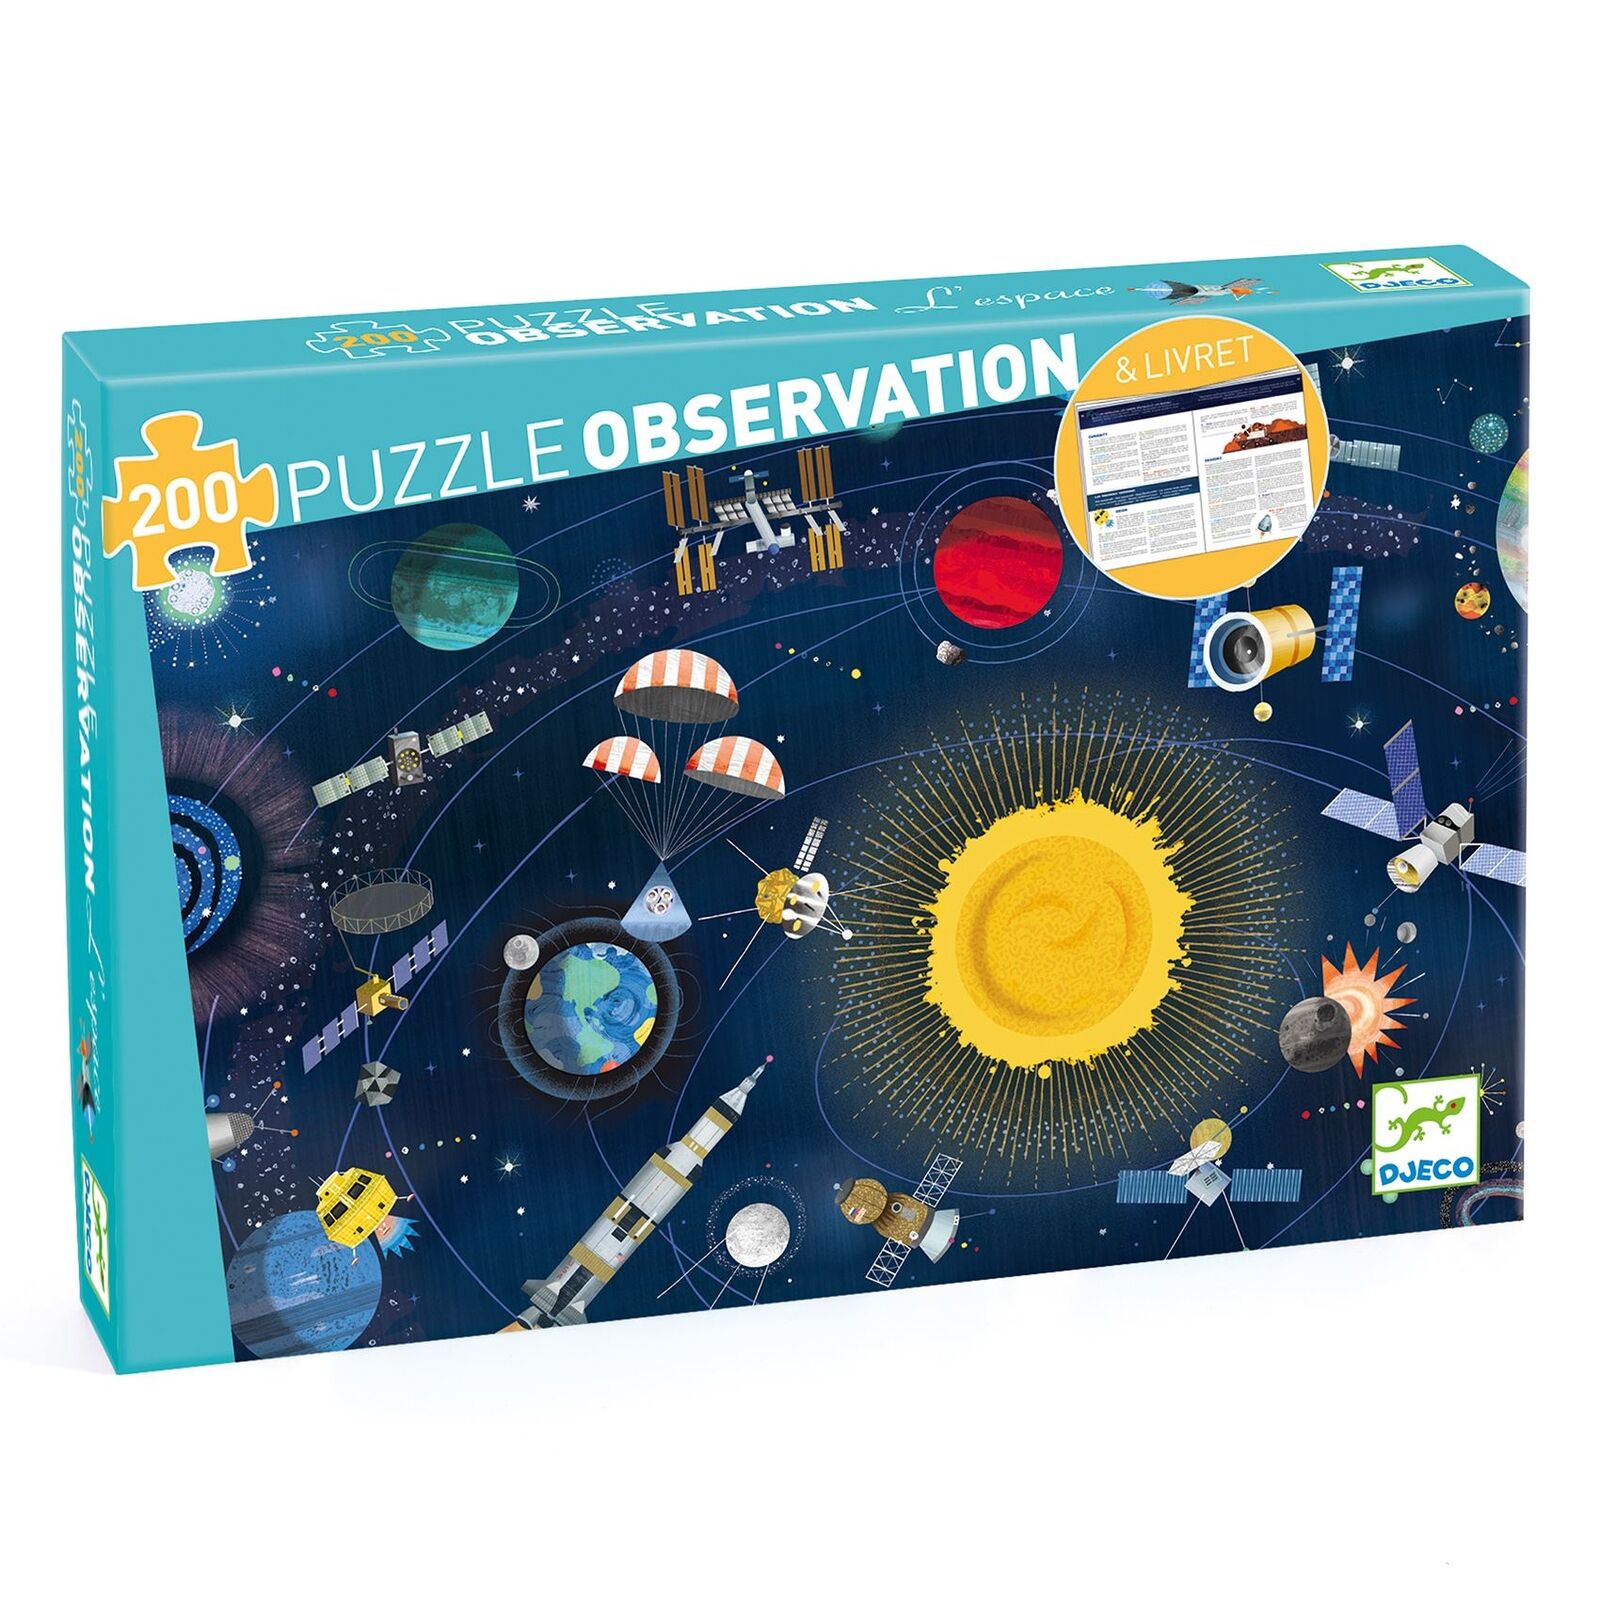 Observation Puzzle - The Space